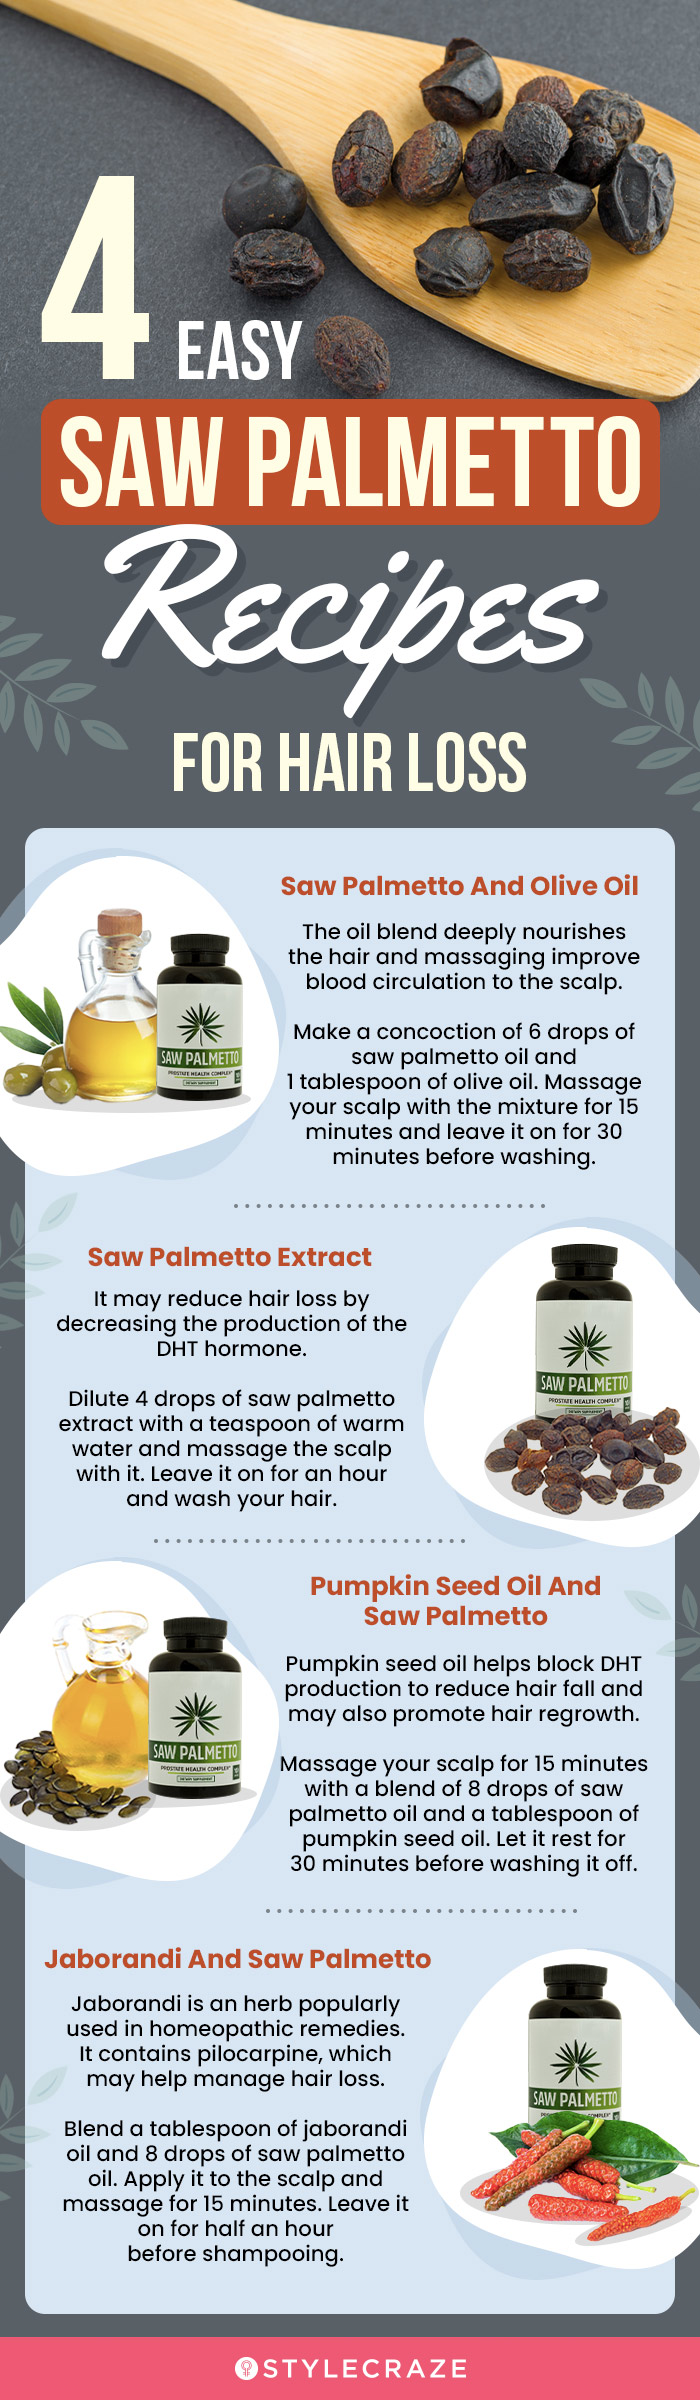 4 easy saw palmetto recipes for hair loss (infographic)